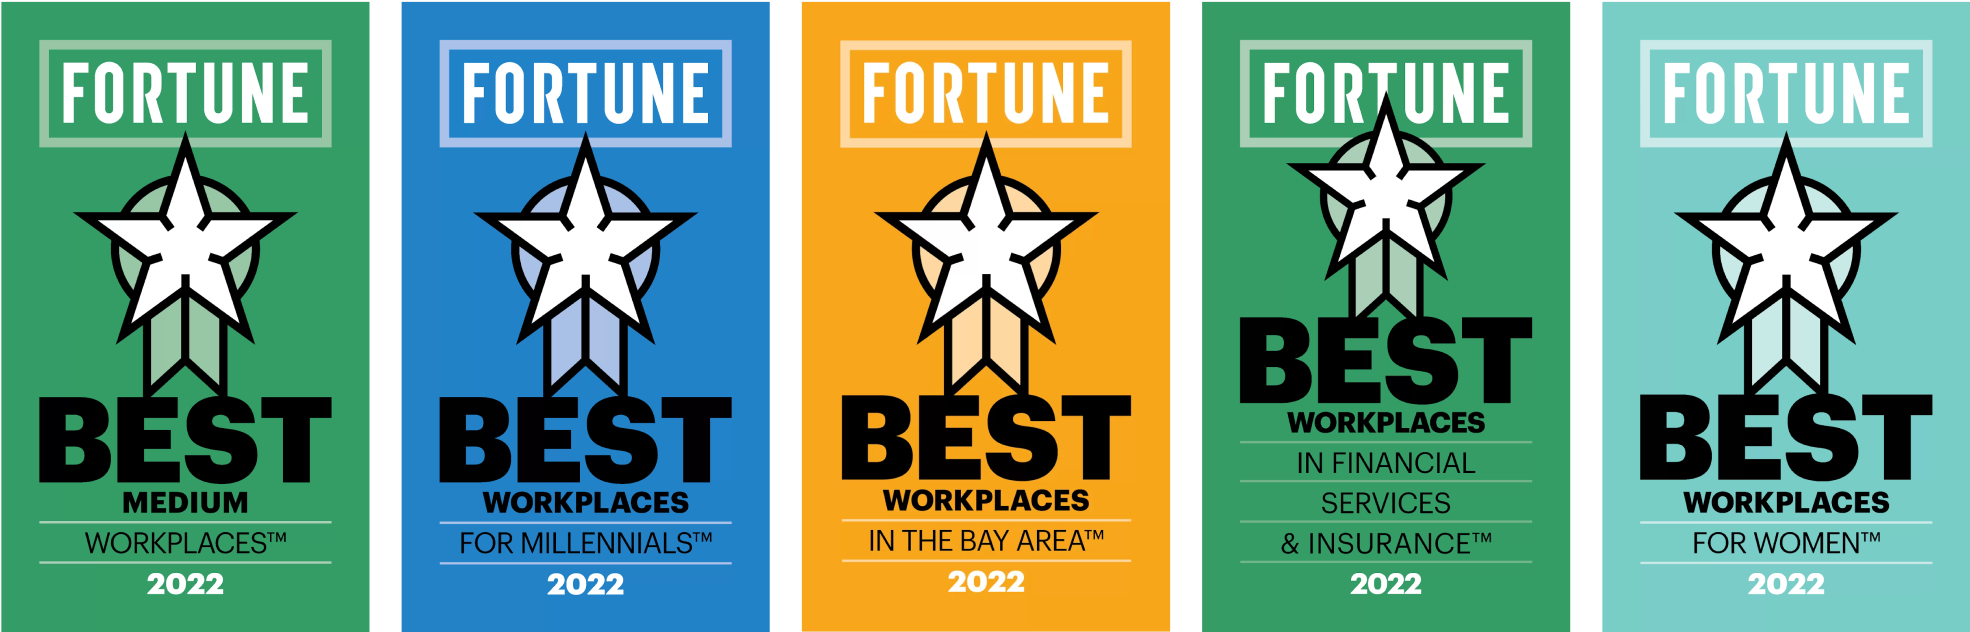 fortune-best-workplaces-awards